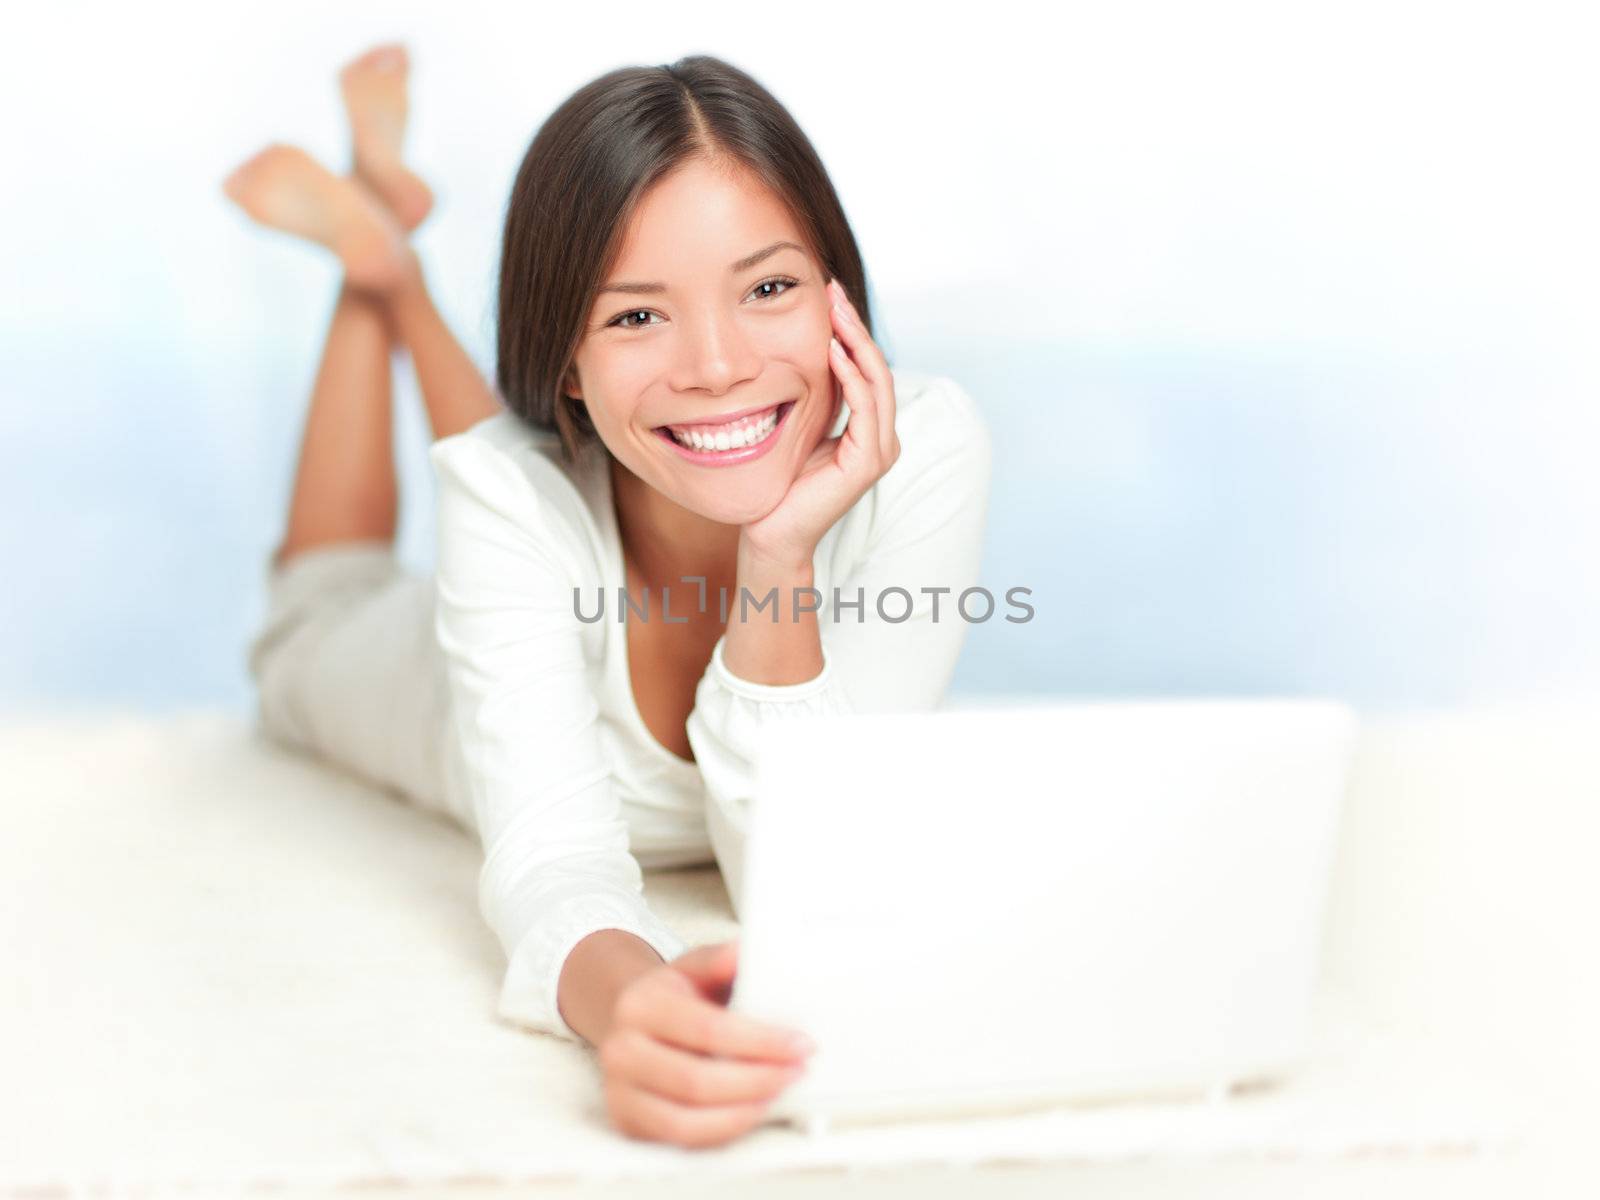 Portrait of smiling woman using laptop lying on the floor with window showing ocean view background. Beautiful female model